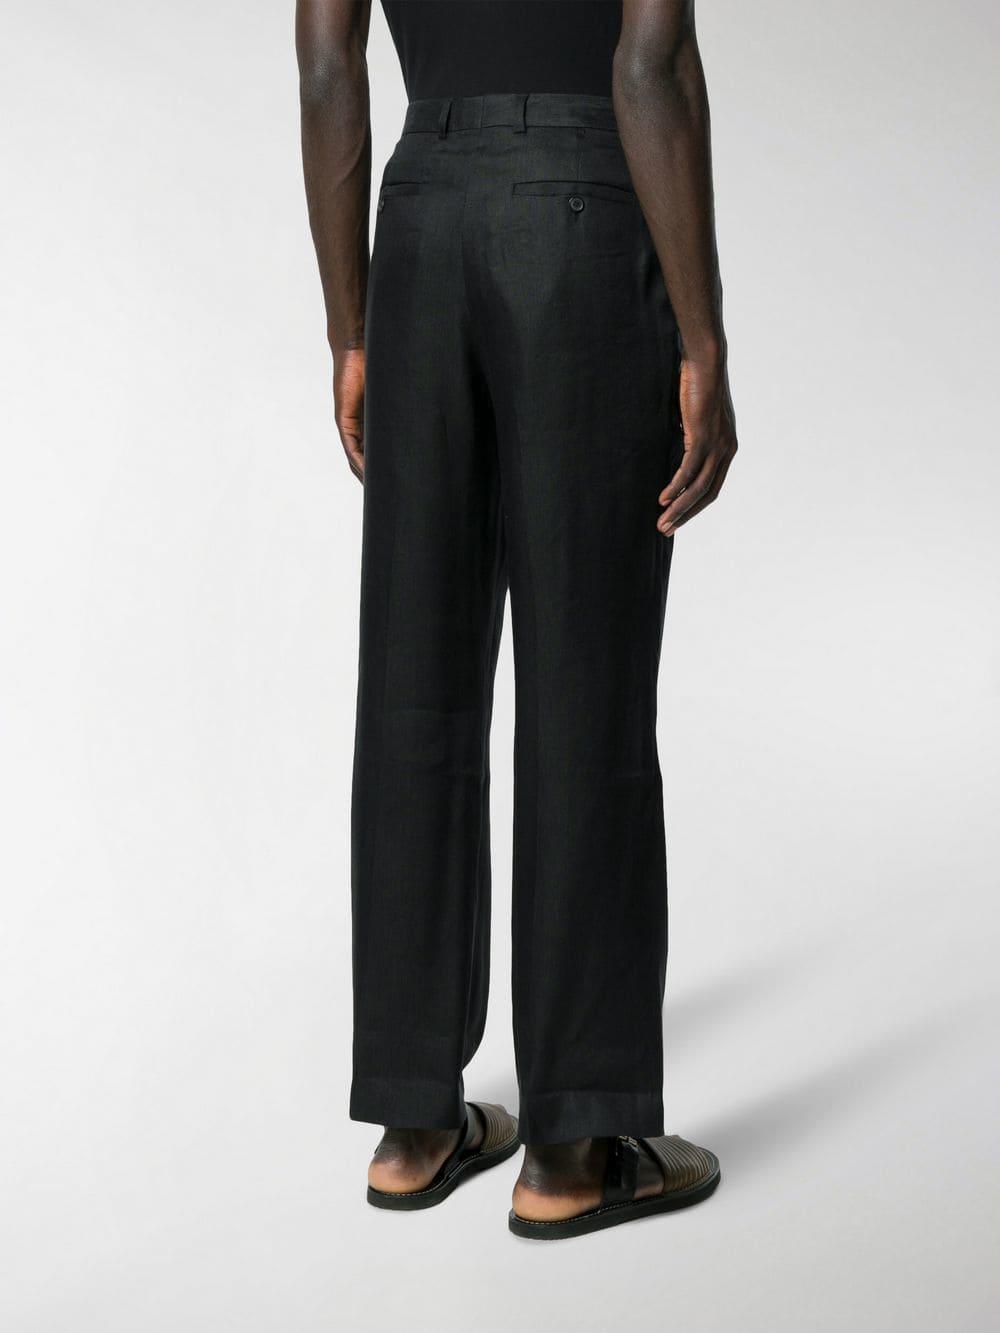 Jacquemus Flared Trousers in Black for Men - Lyst